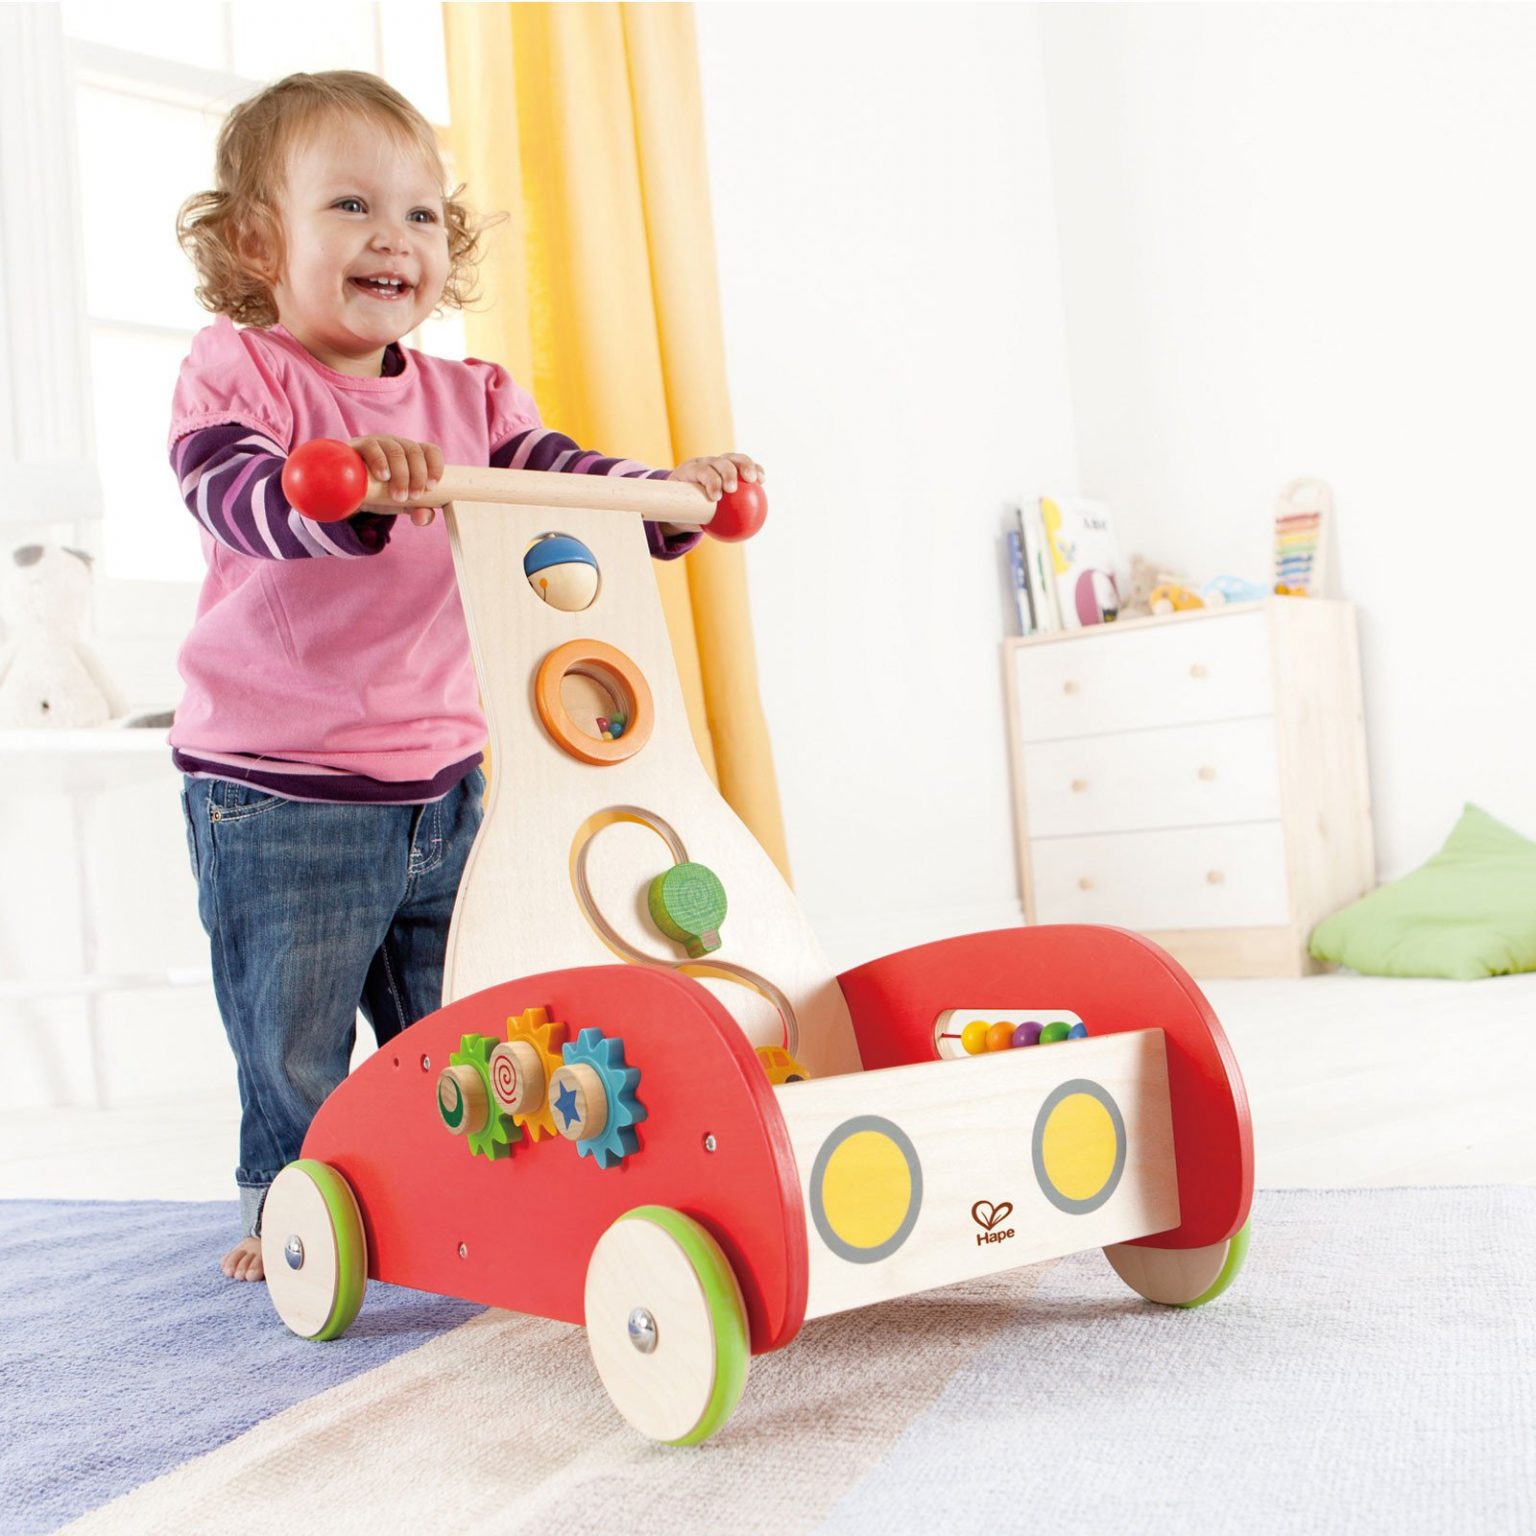 Baby Walker Development Problems: What Every Parent Should Know